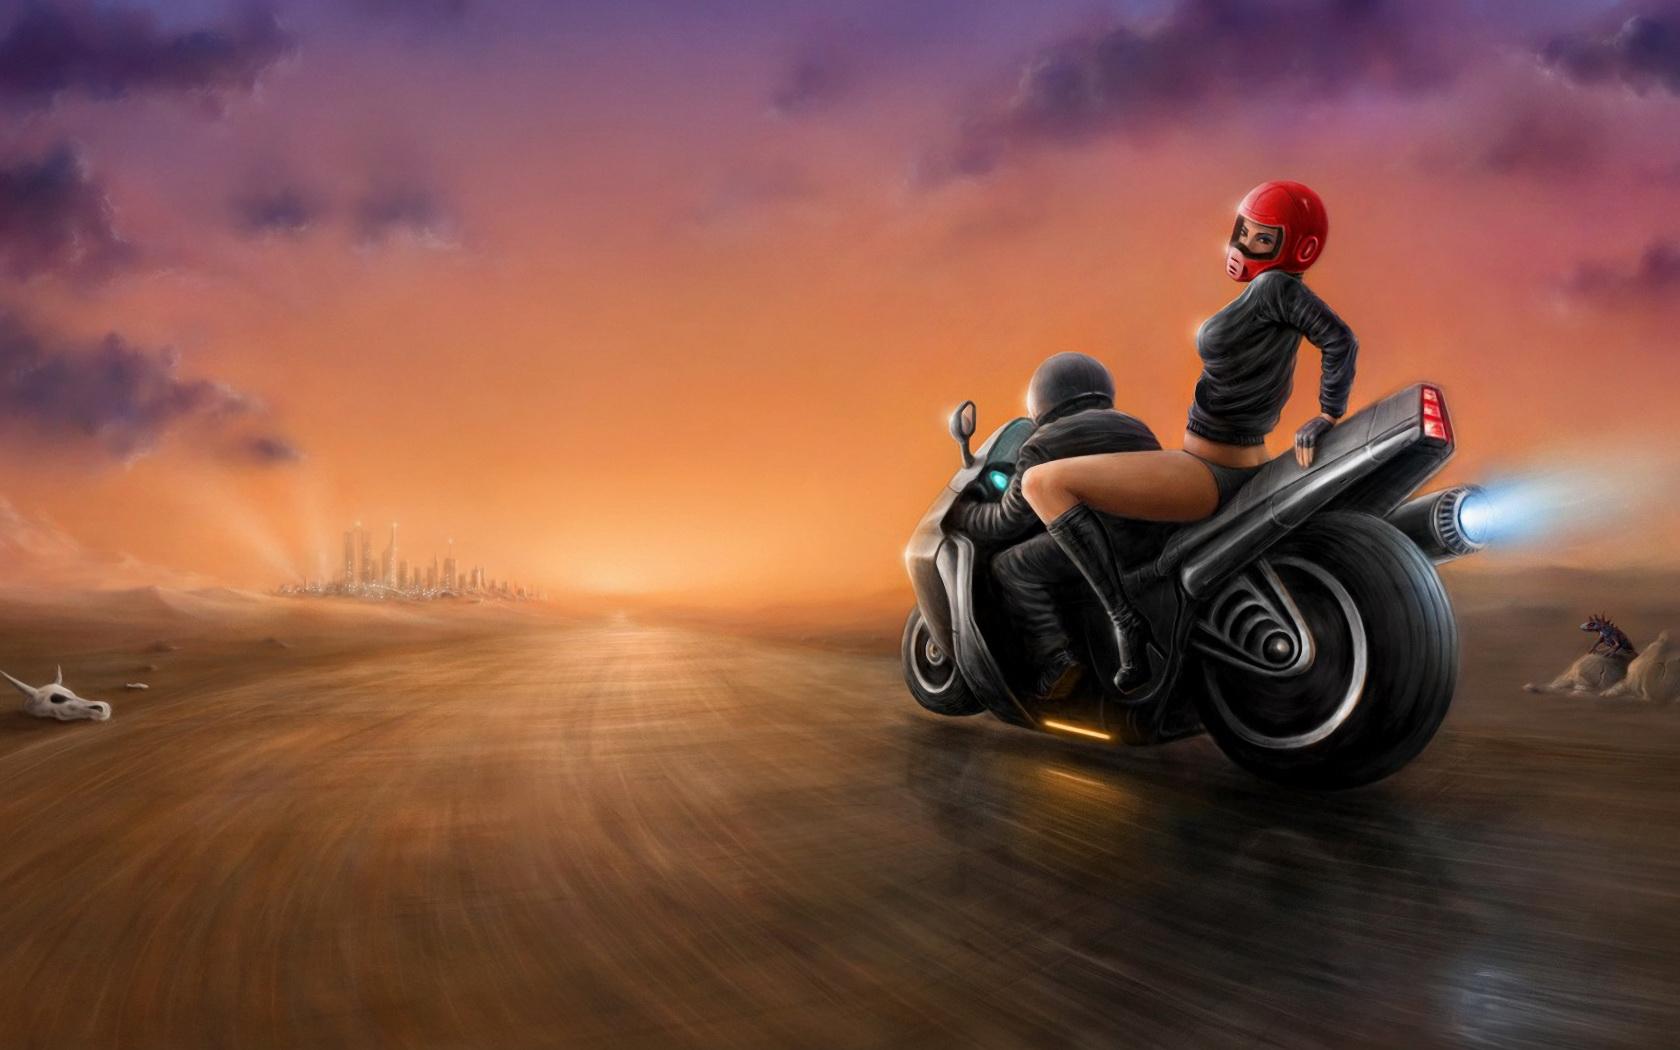 Artistic motorcycle hd papers and backgrounds